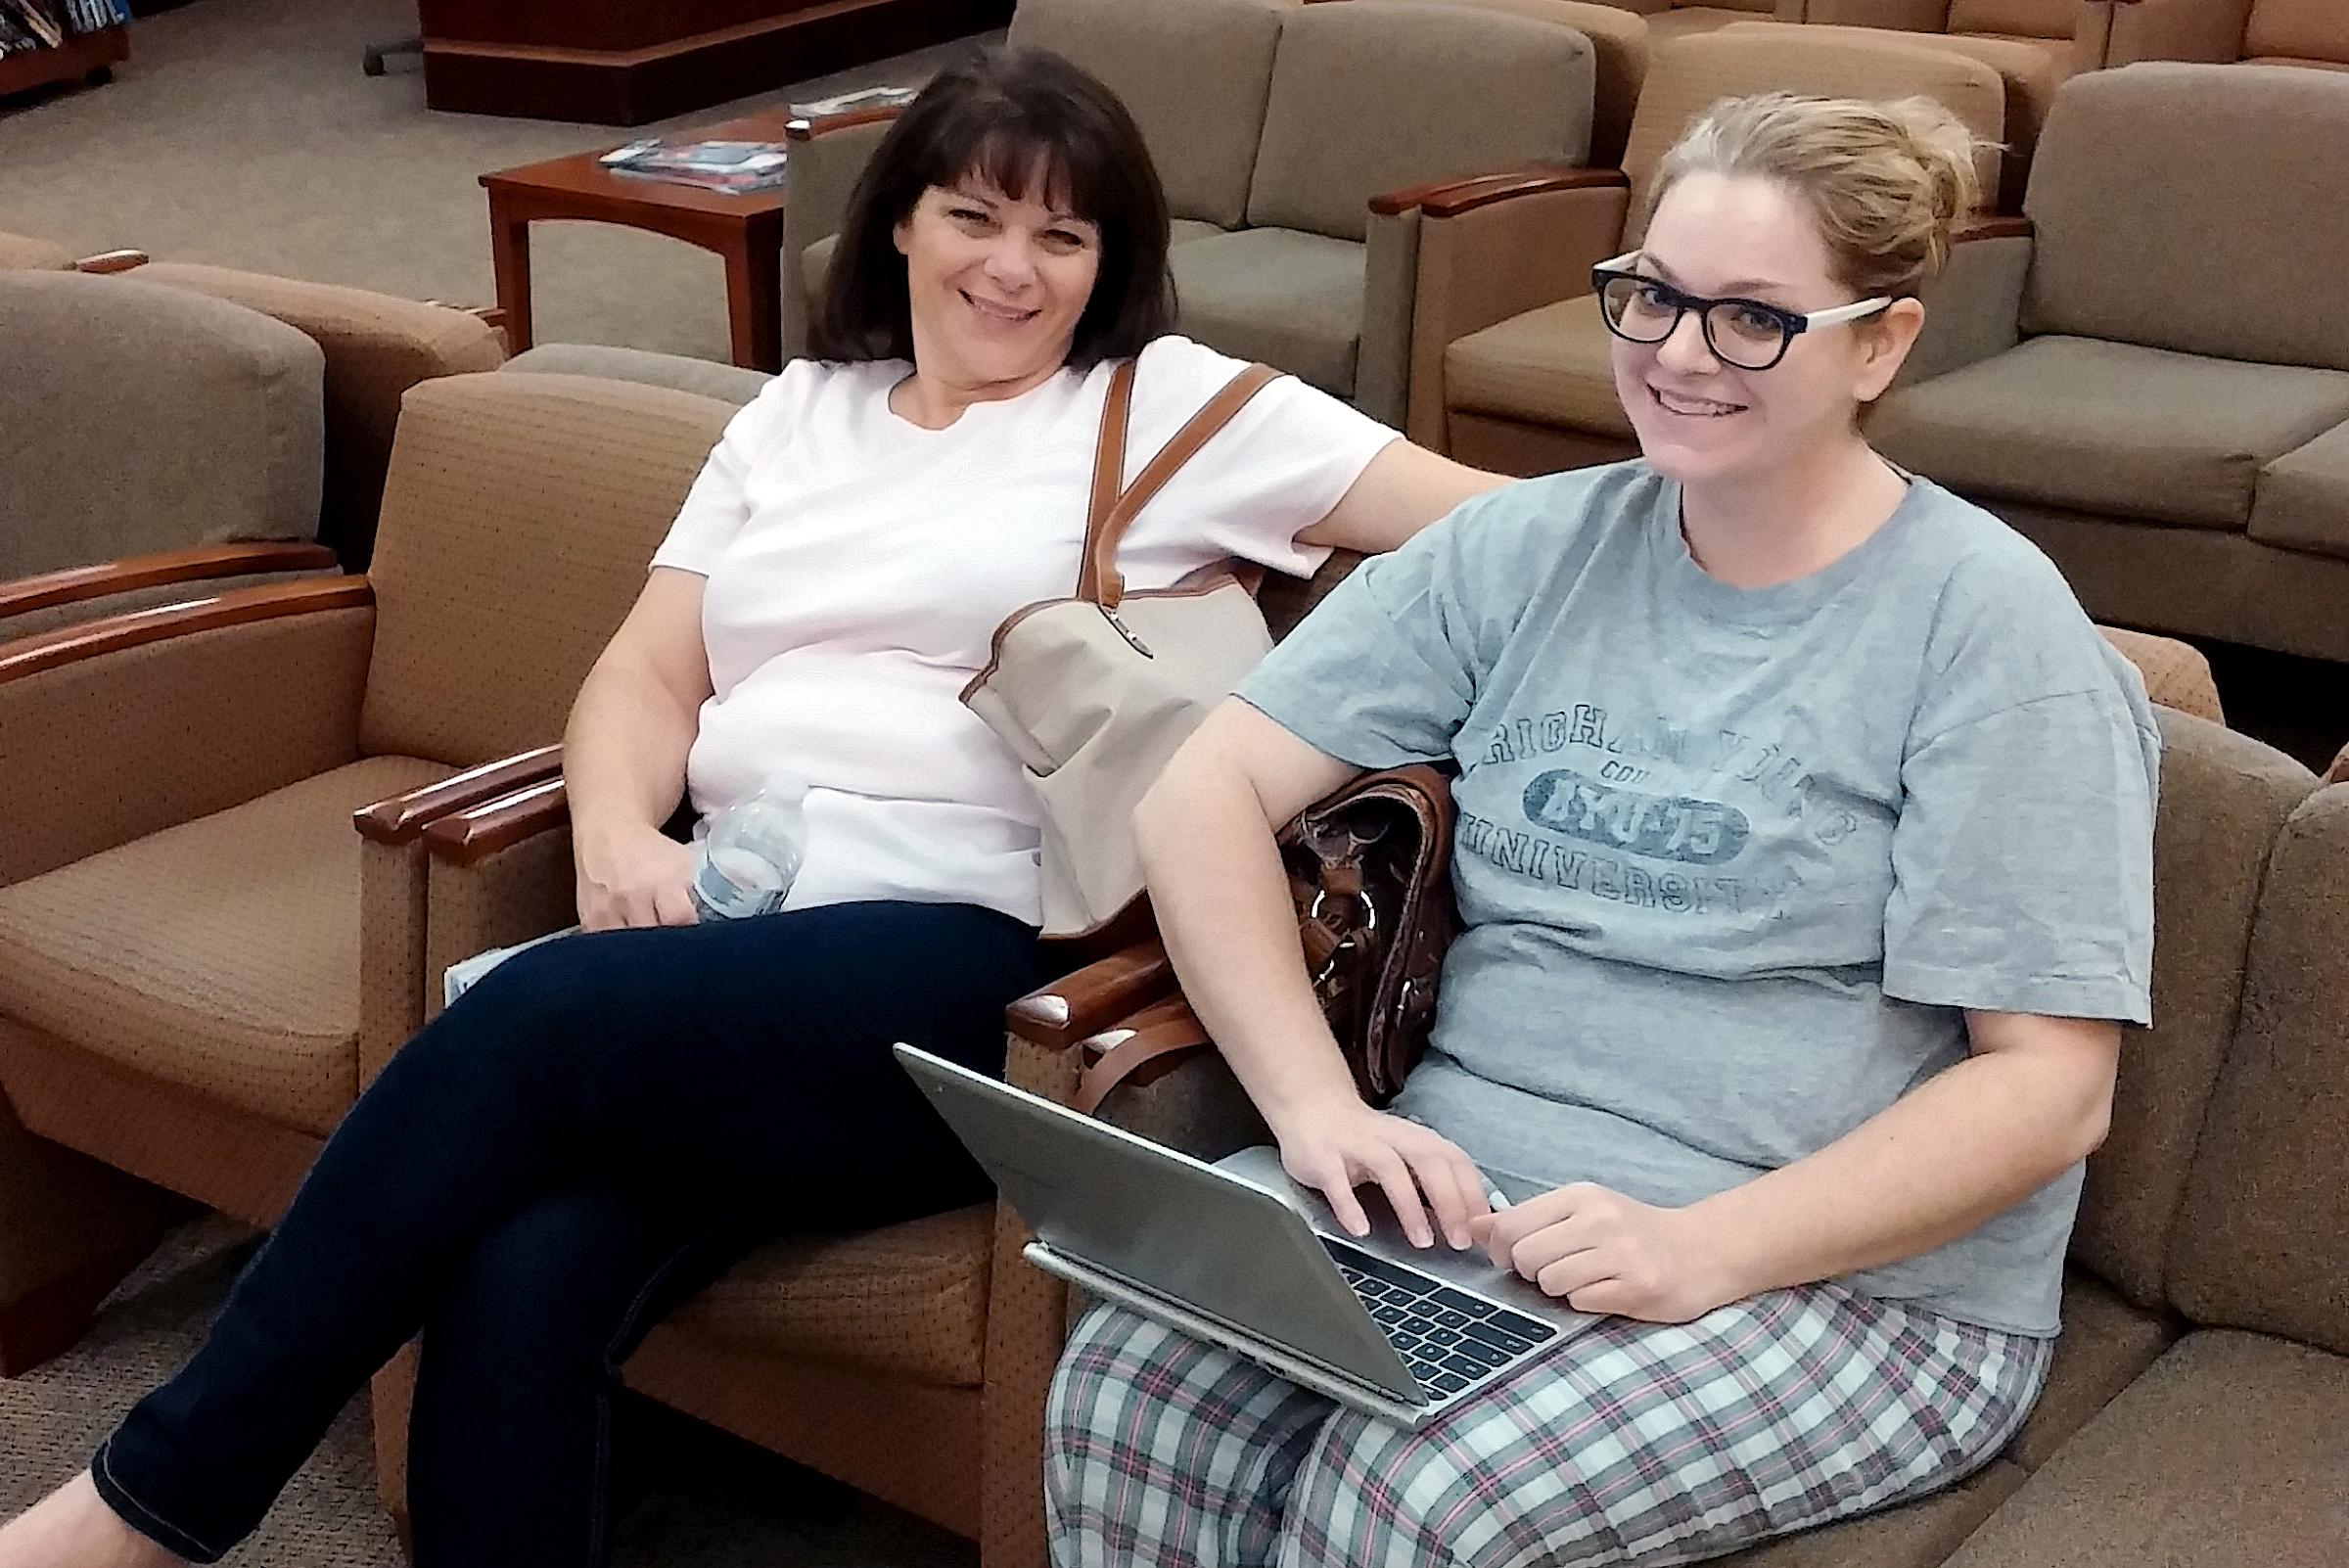 Shelli sitting in a waiting room with her mom, holding a laptop